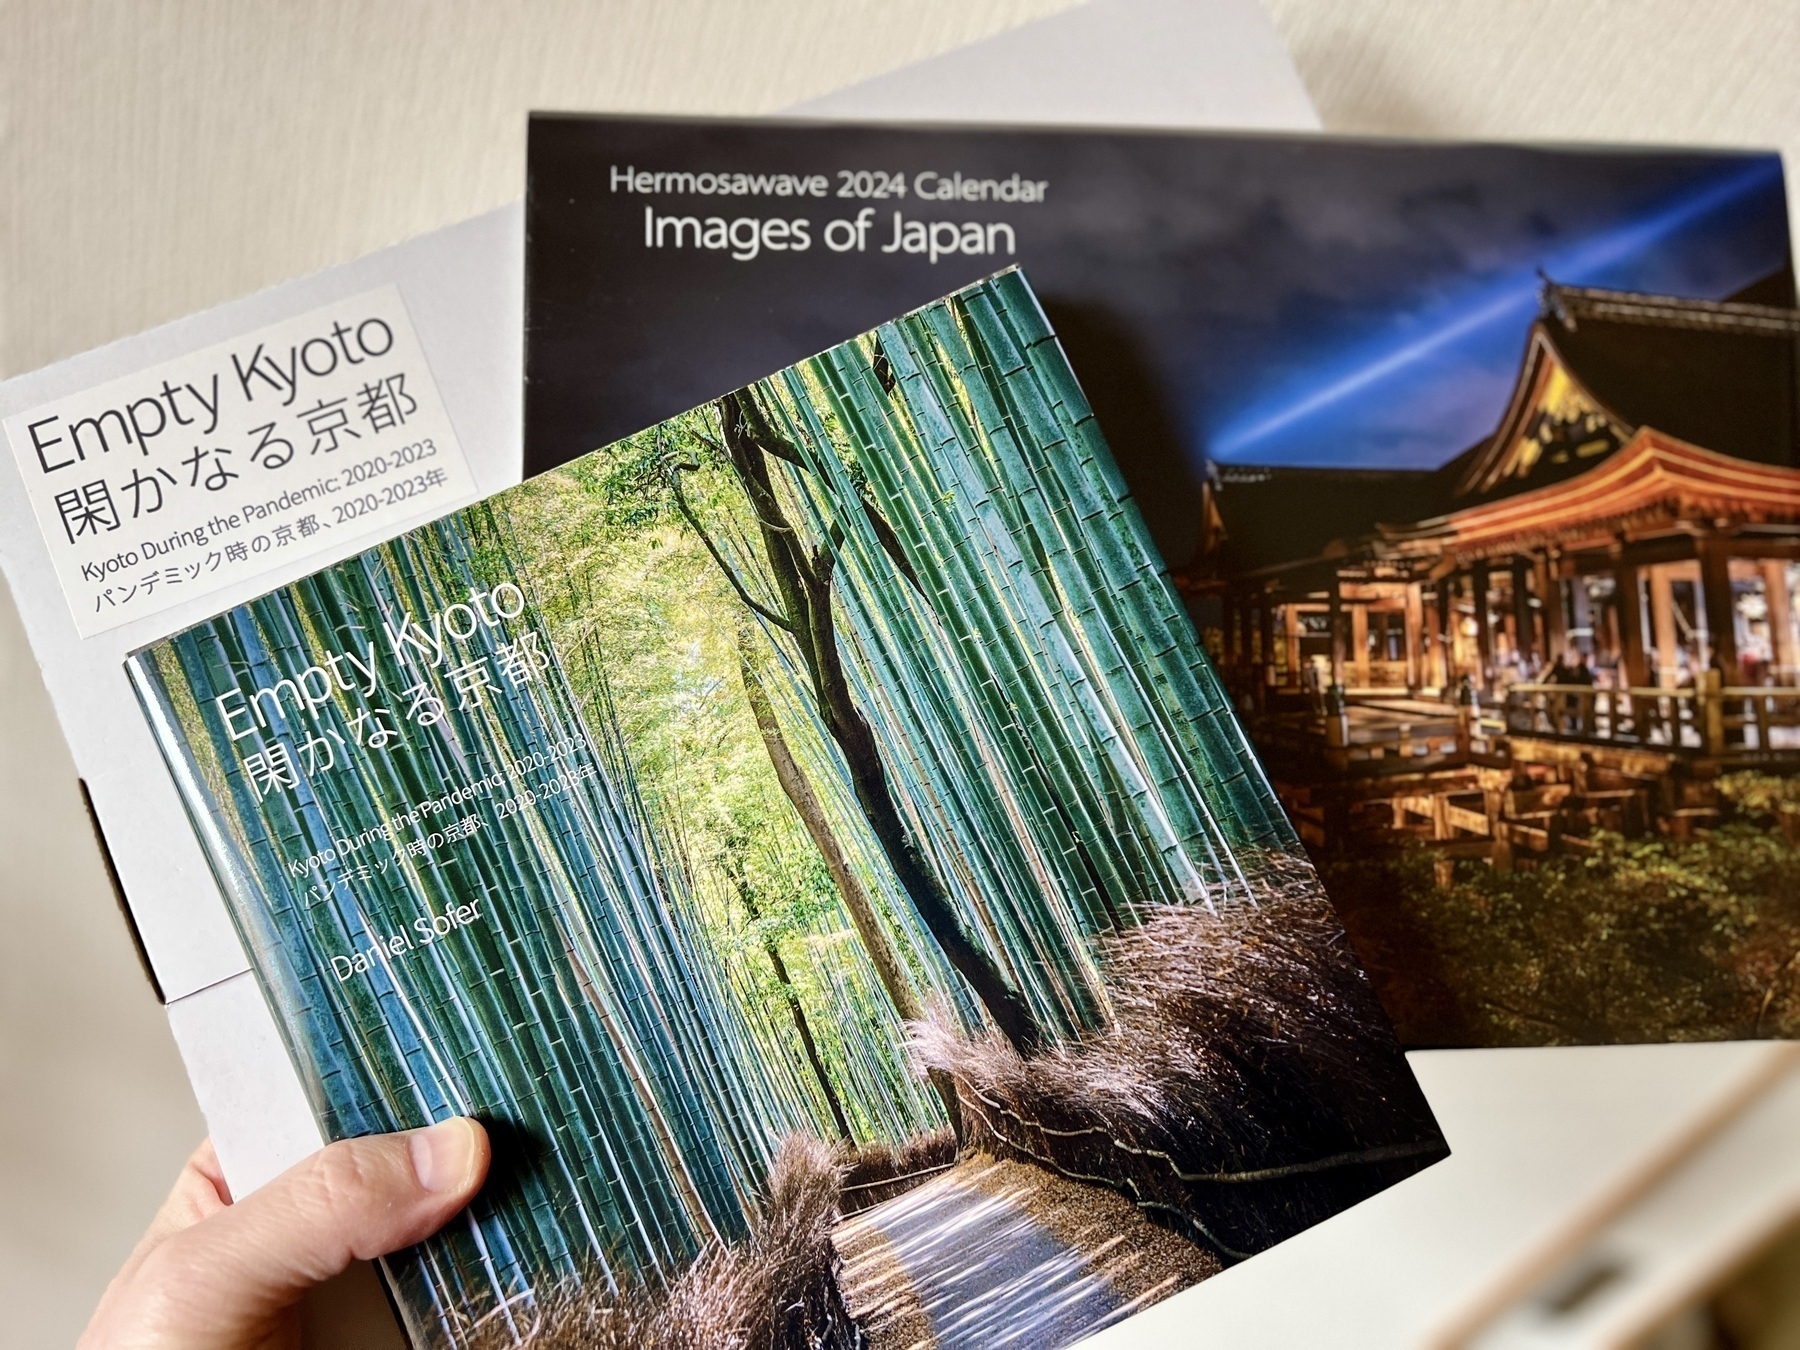 Chad holds up the book (cover showing the bamboo grove of Arashiyama), calendar (with a night shot of Kiyomizudera), and the box the book came in